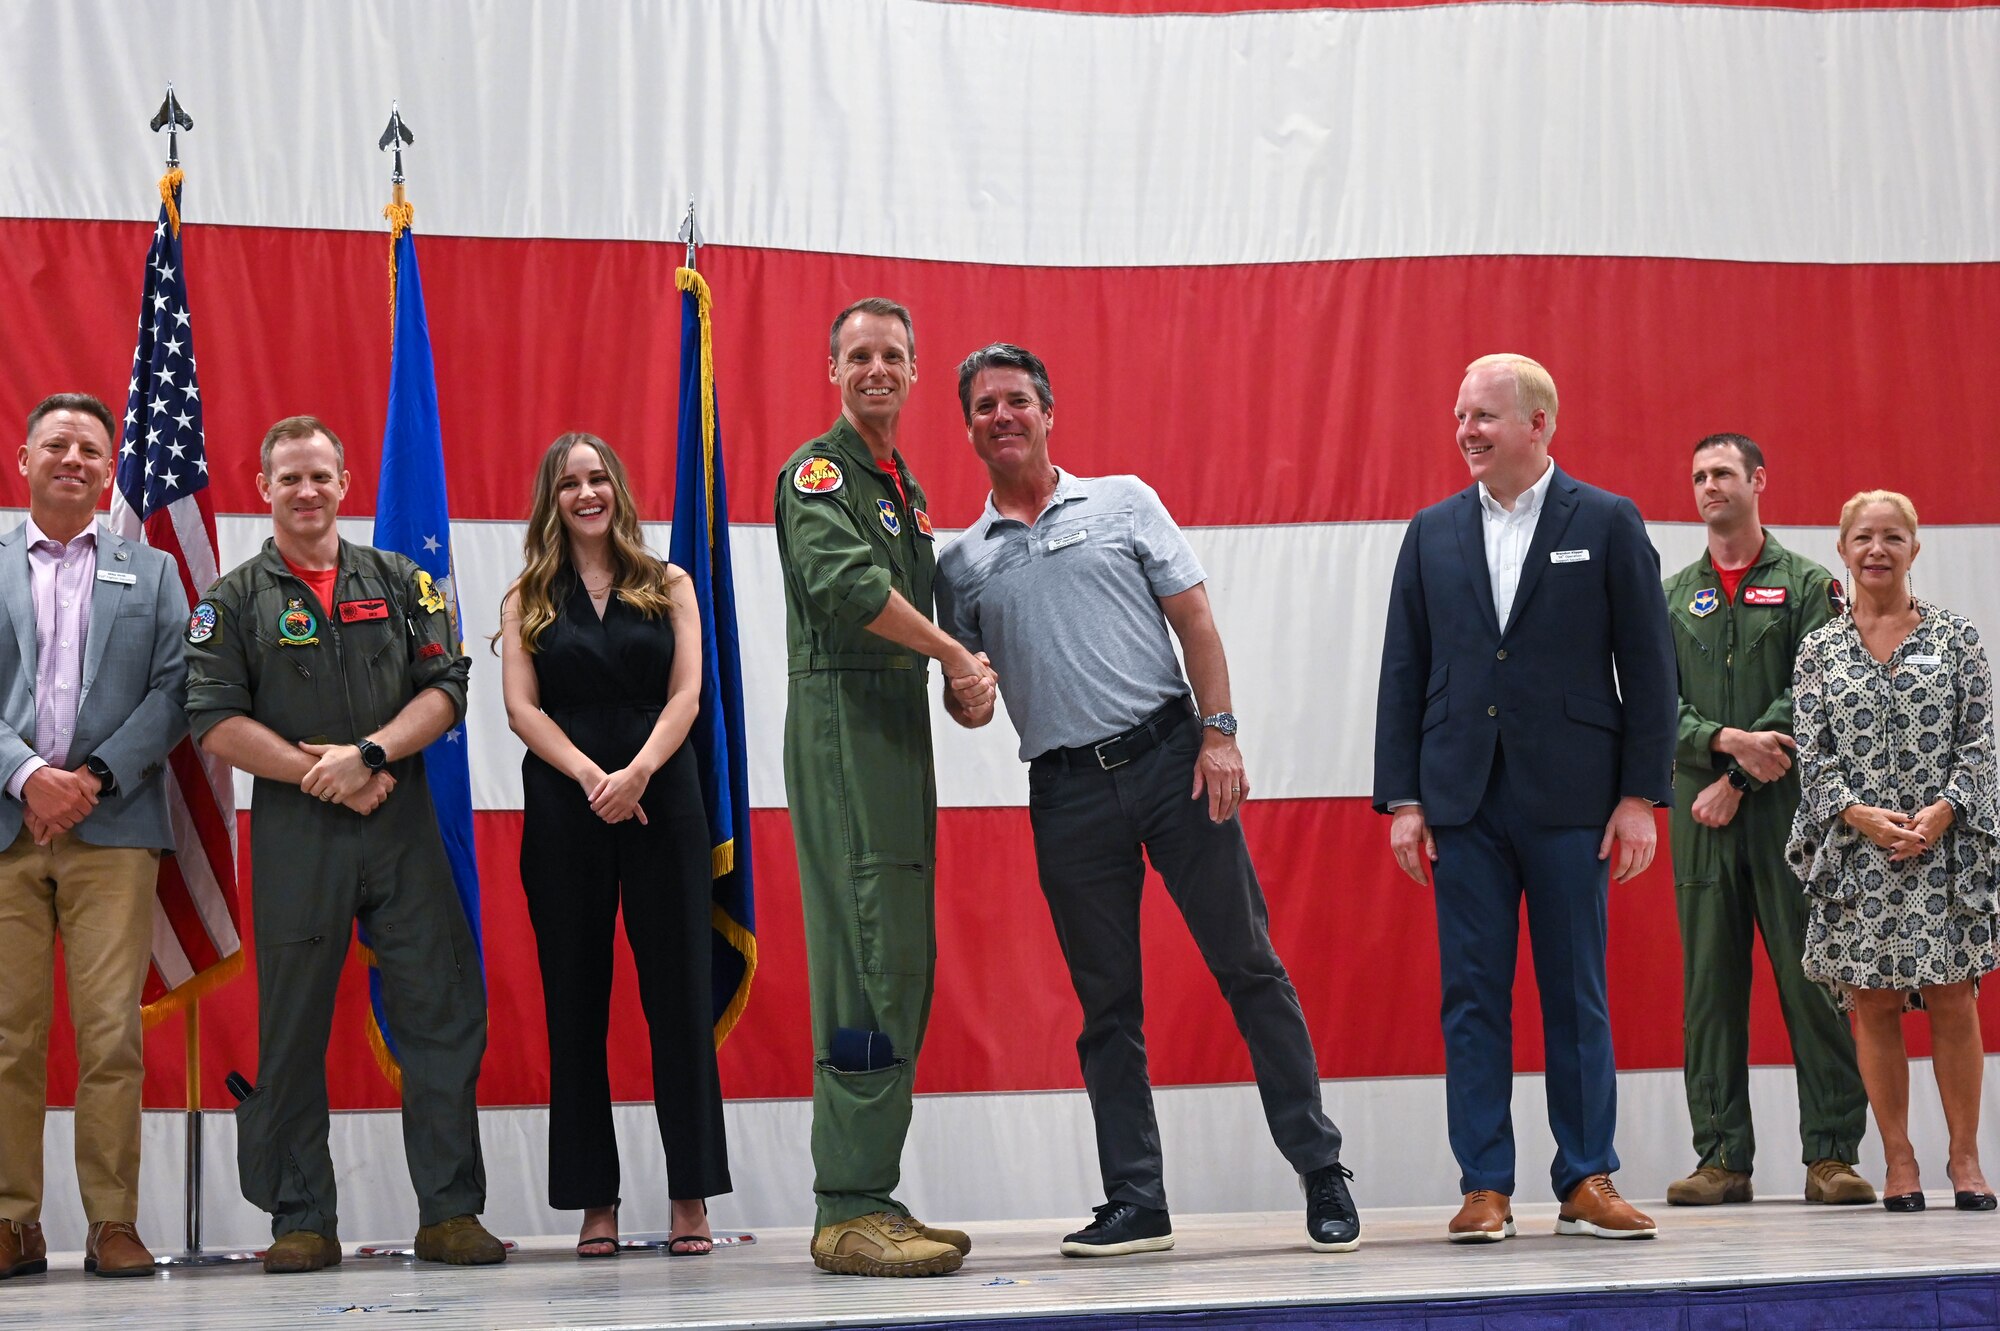 U.S. Air Force Lt. Col. Joshua Larsen, 56th Operation Support Squadron commander, coins Marc Hertzberg and Brandon Klippel, honorary commander inductees, during a ceremony, Oct. 14, 2022, at Luke Air Force Base, Arizona.